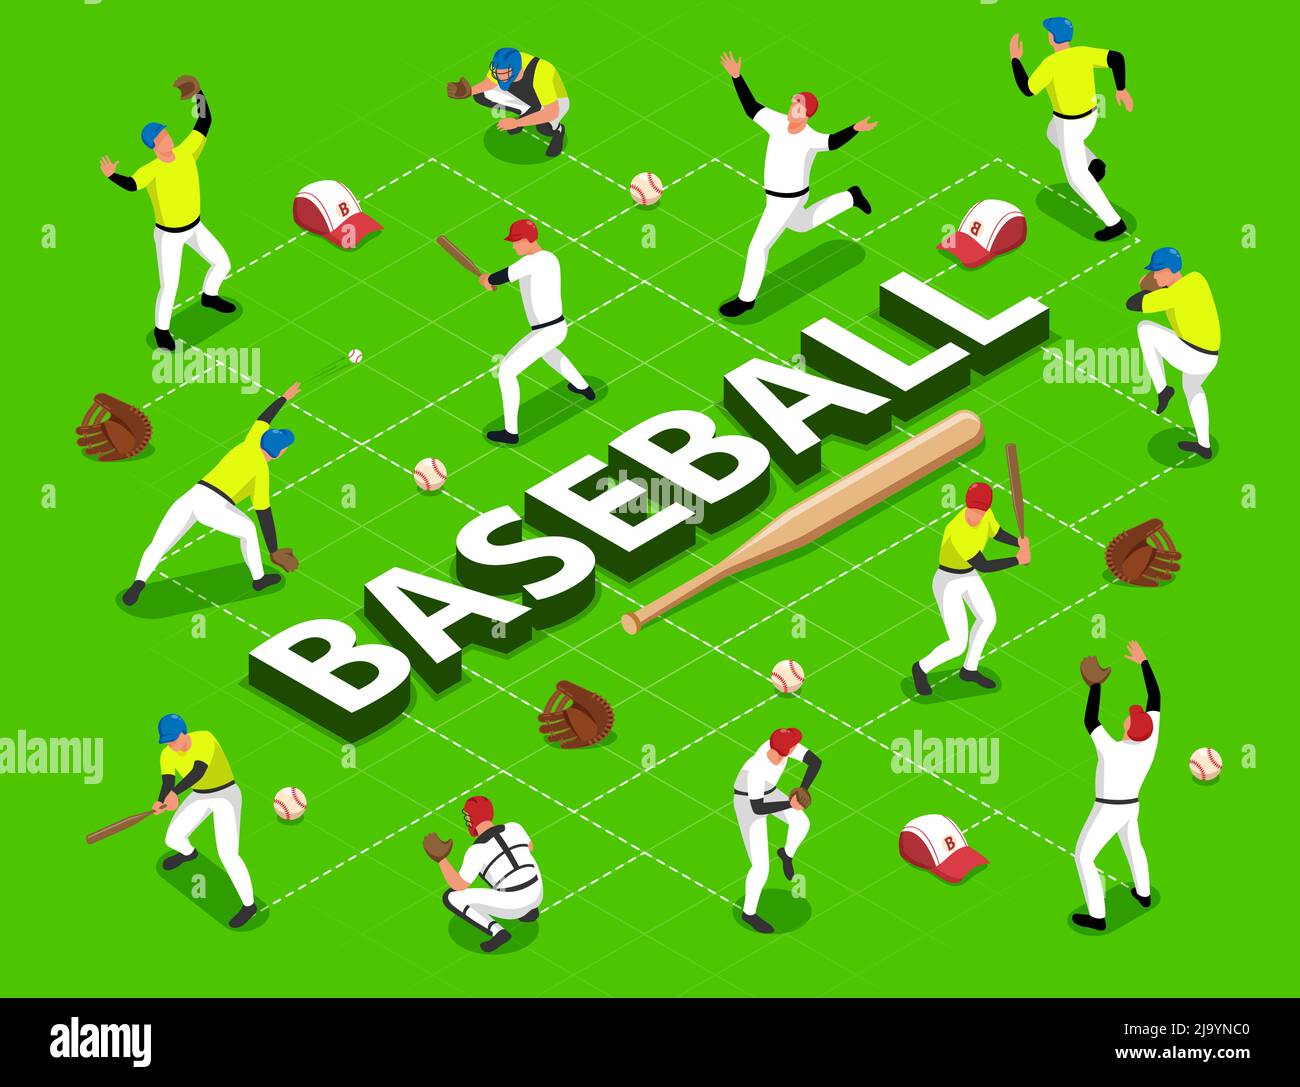 Isometric flowchart with baseball players and game equipment 3d vector illustration Stock Vector